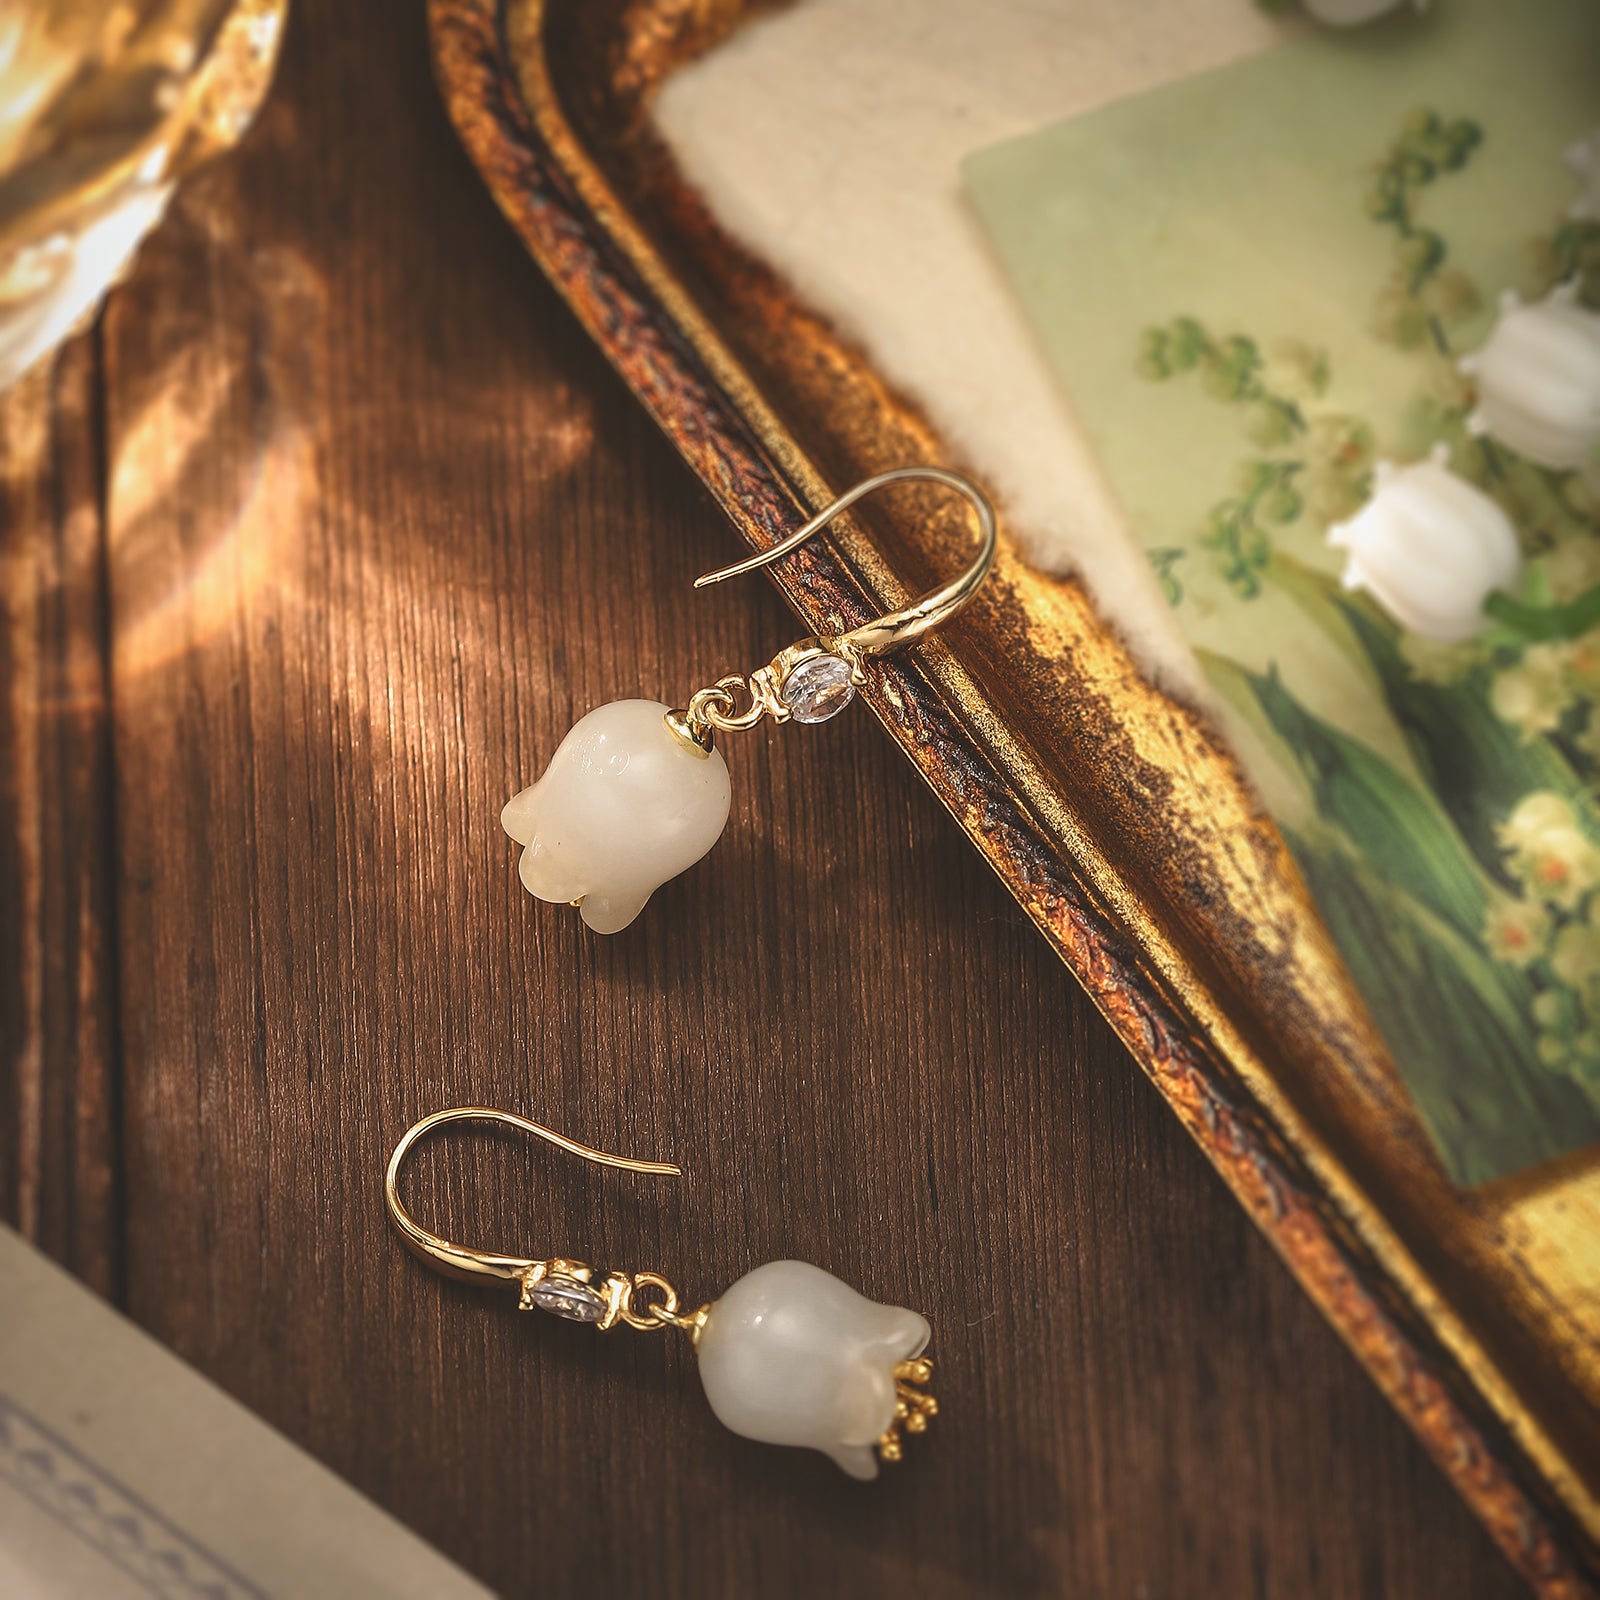 White Jade Lily Of The Valley Earrings